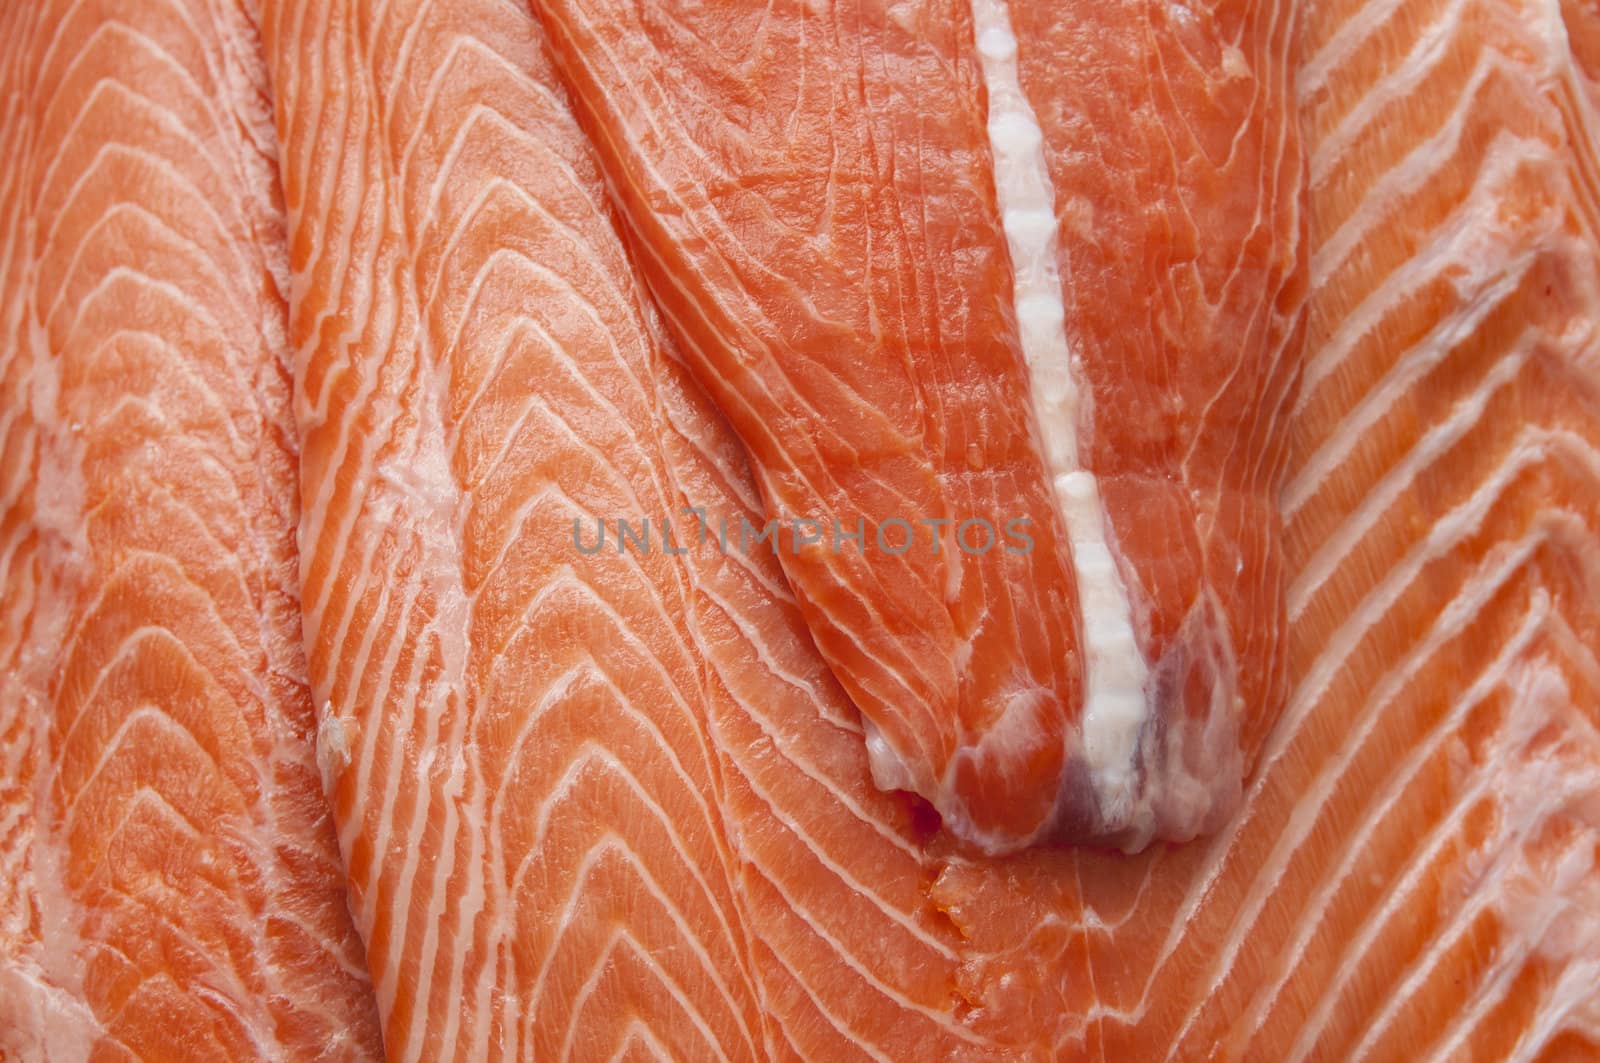 salmon by Lester120